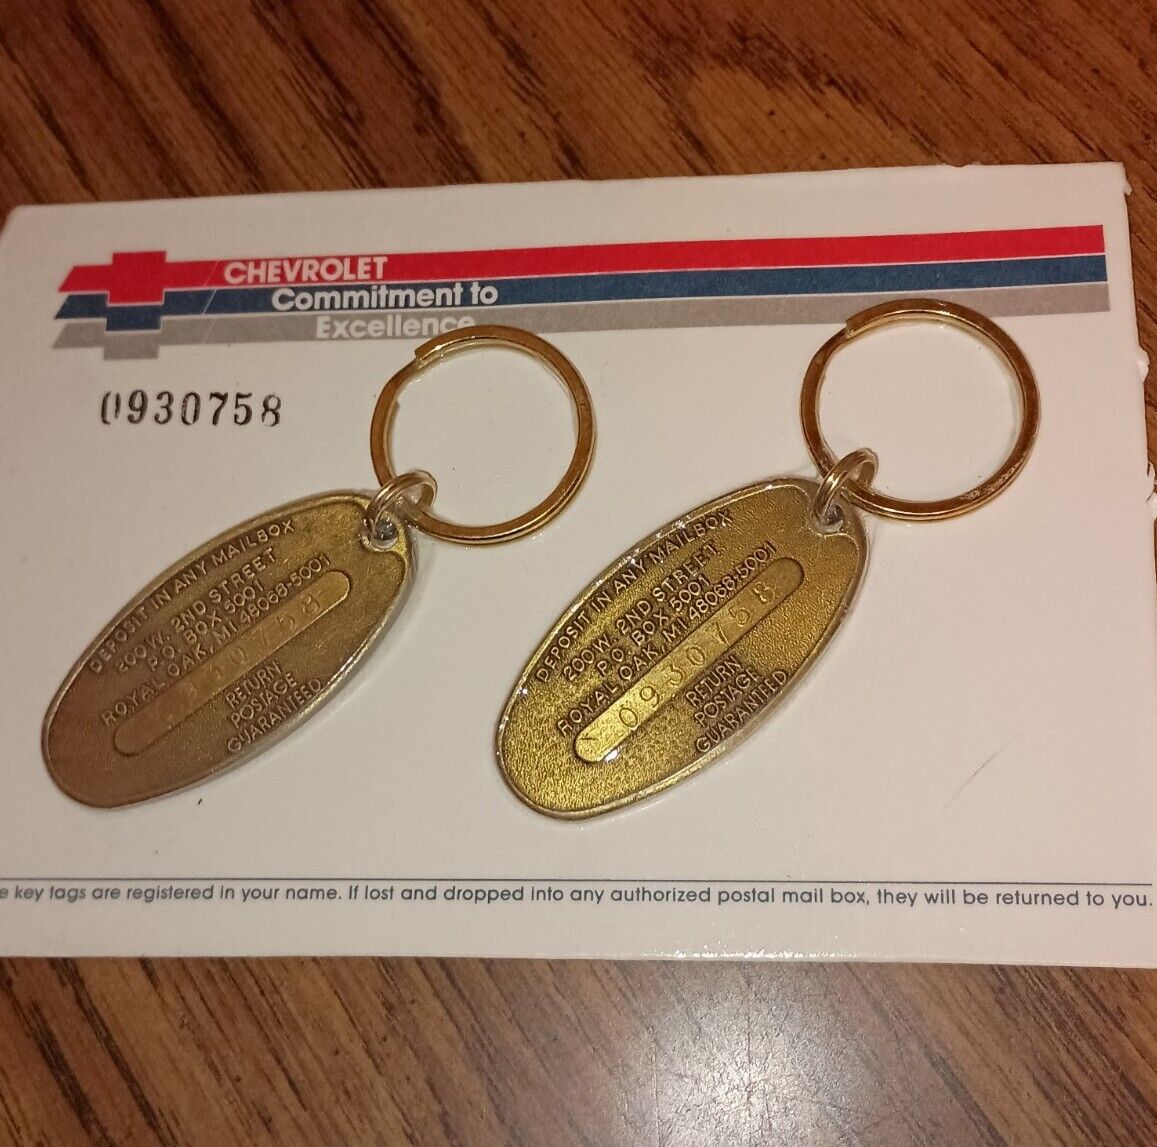 Vintage Chevrolet Commitment To Excellence Keychains New On Card